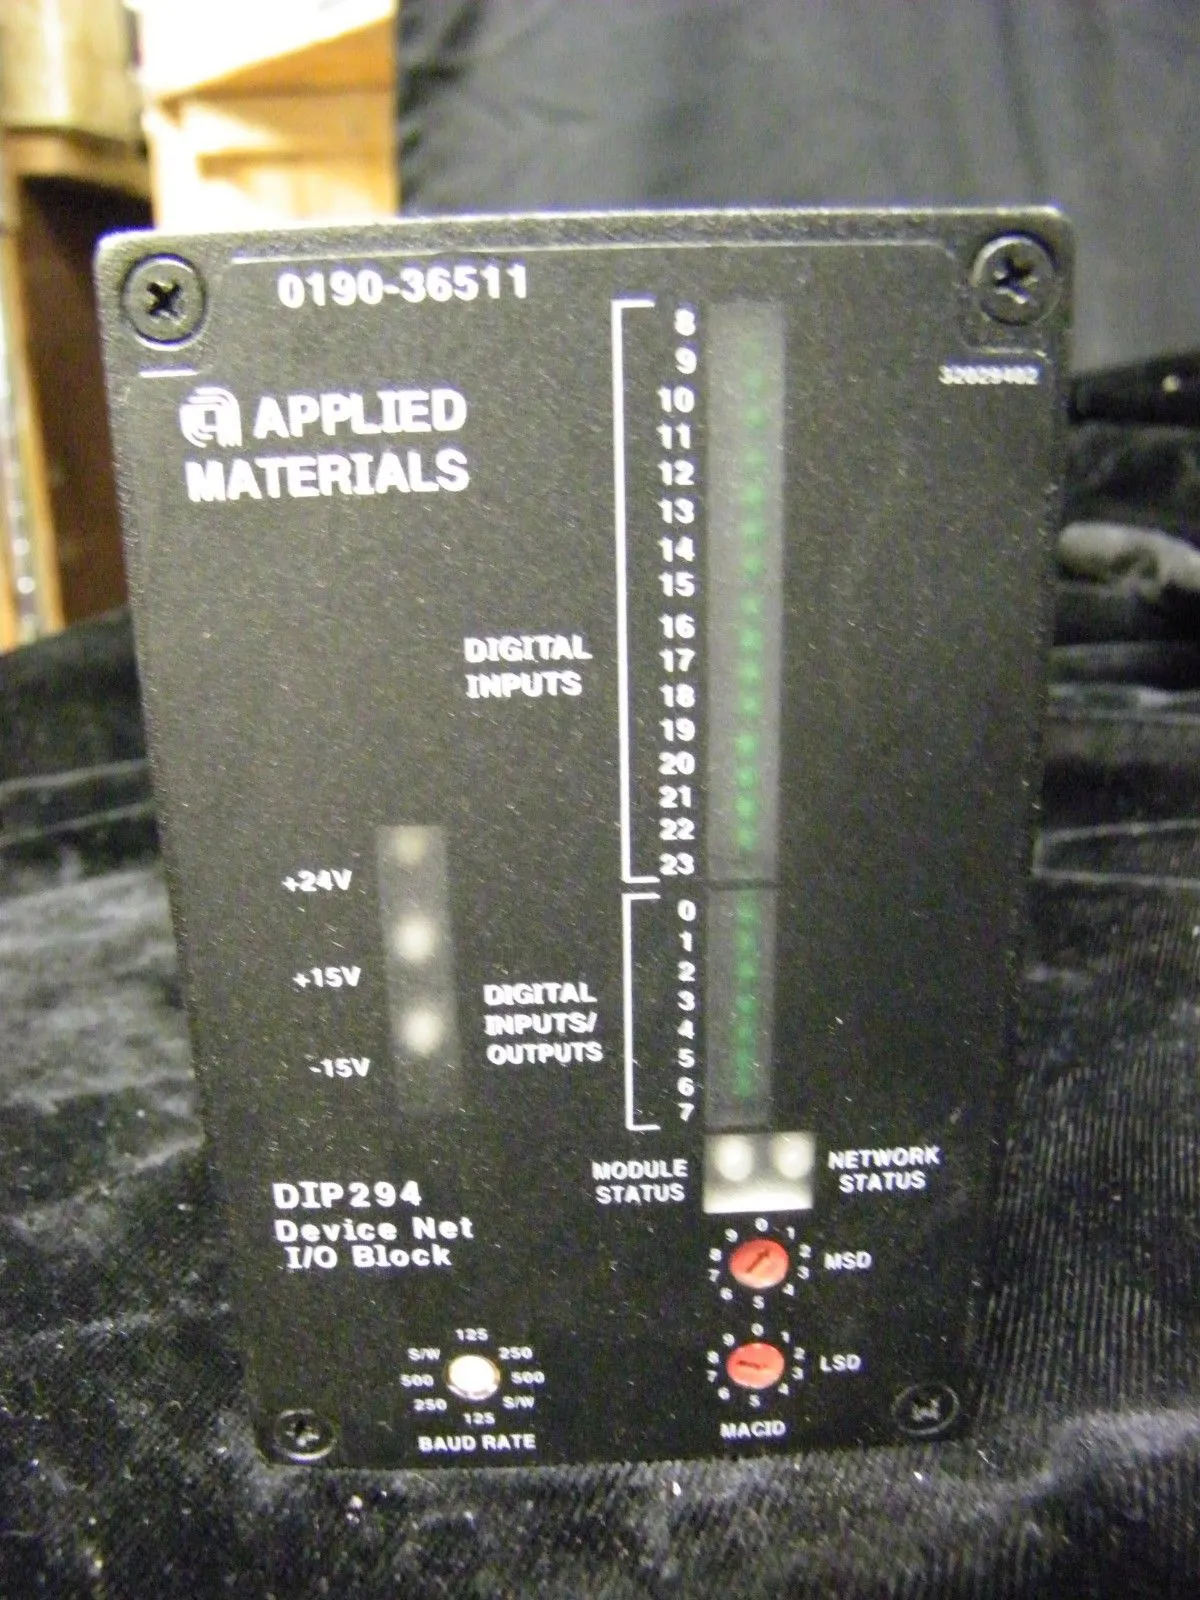 APPLIED MATERIALS 0190-36511 DIP294 Device Net I/O Block